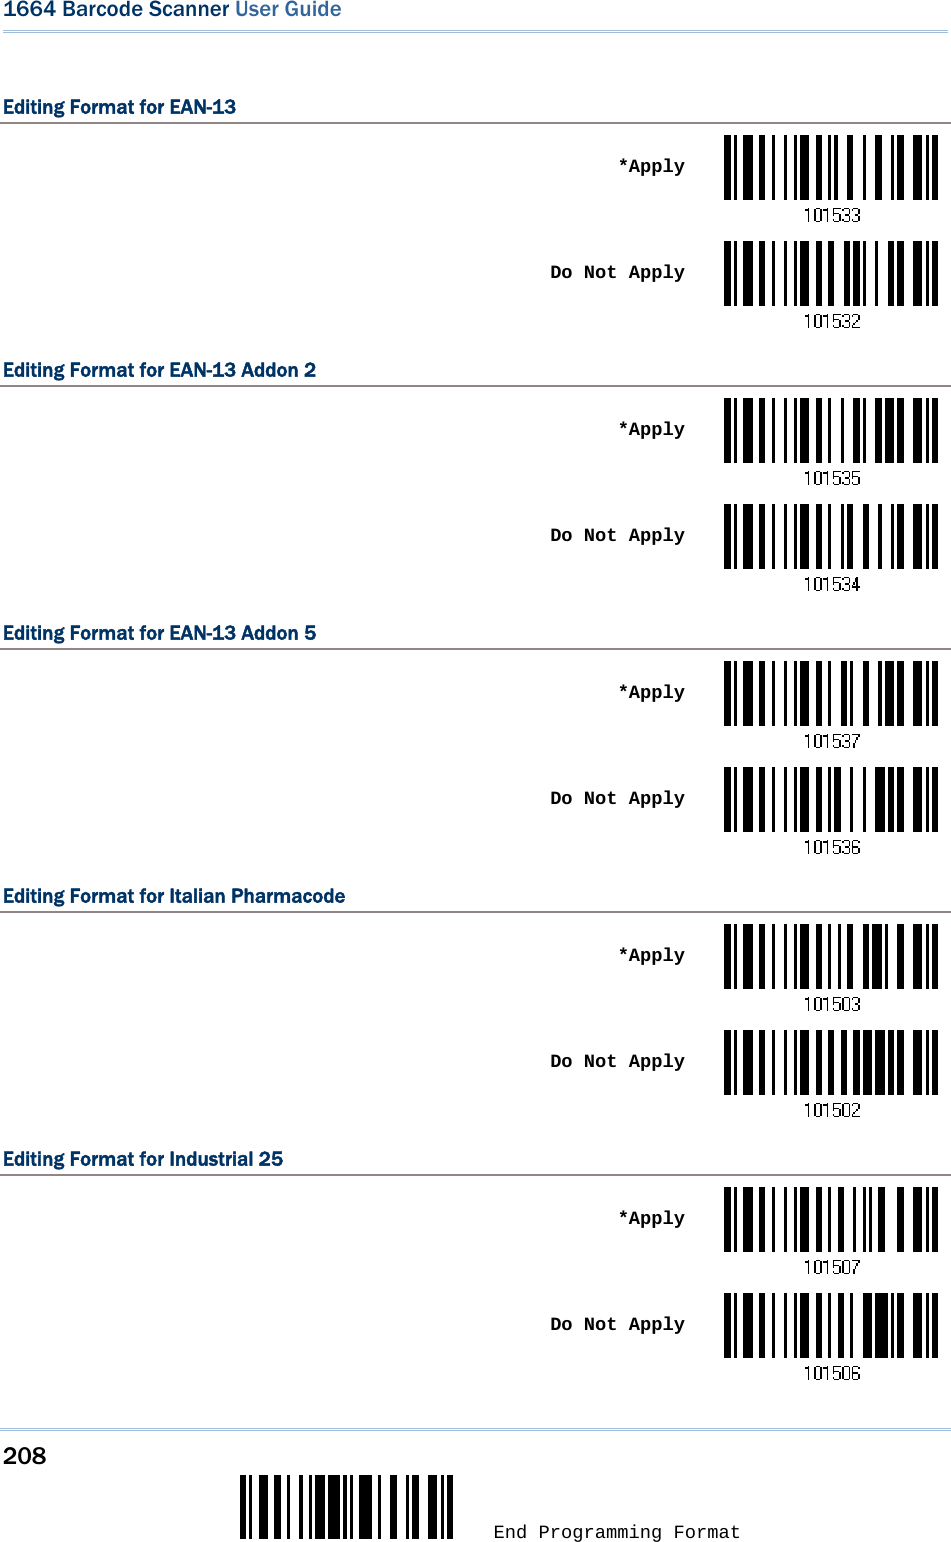 208  End Programming Format 1664 Barcode Scanner User Guide  Editing Format for EAN-13  *Apply Do Not ApplyEditing Format for EAN-13 Addon 2  *Apply Do Not ApplyEditing Format for EAN-13 Addon 5  *Apply Do Not ApplyEditing Format for Italian Pharmacode  *Apply Do Not ApplyEditing Format for Industrial 25  *Apply Do Not Apply